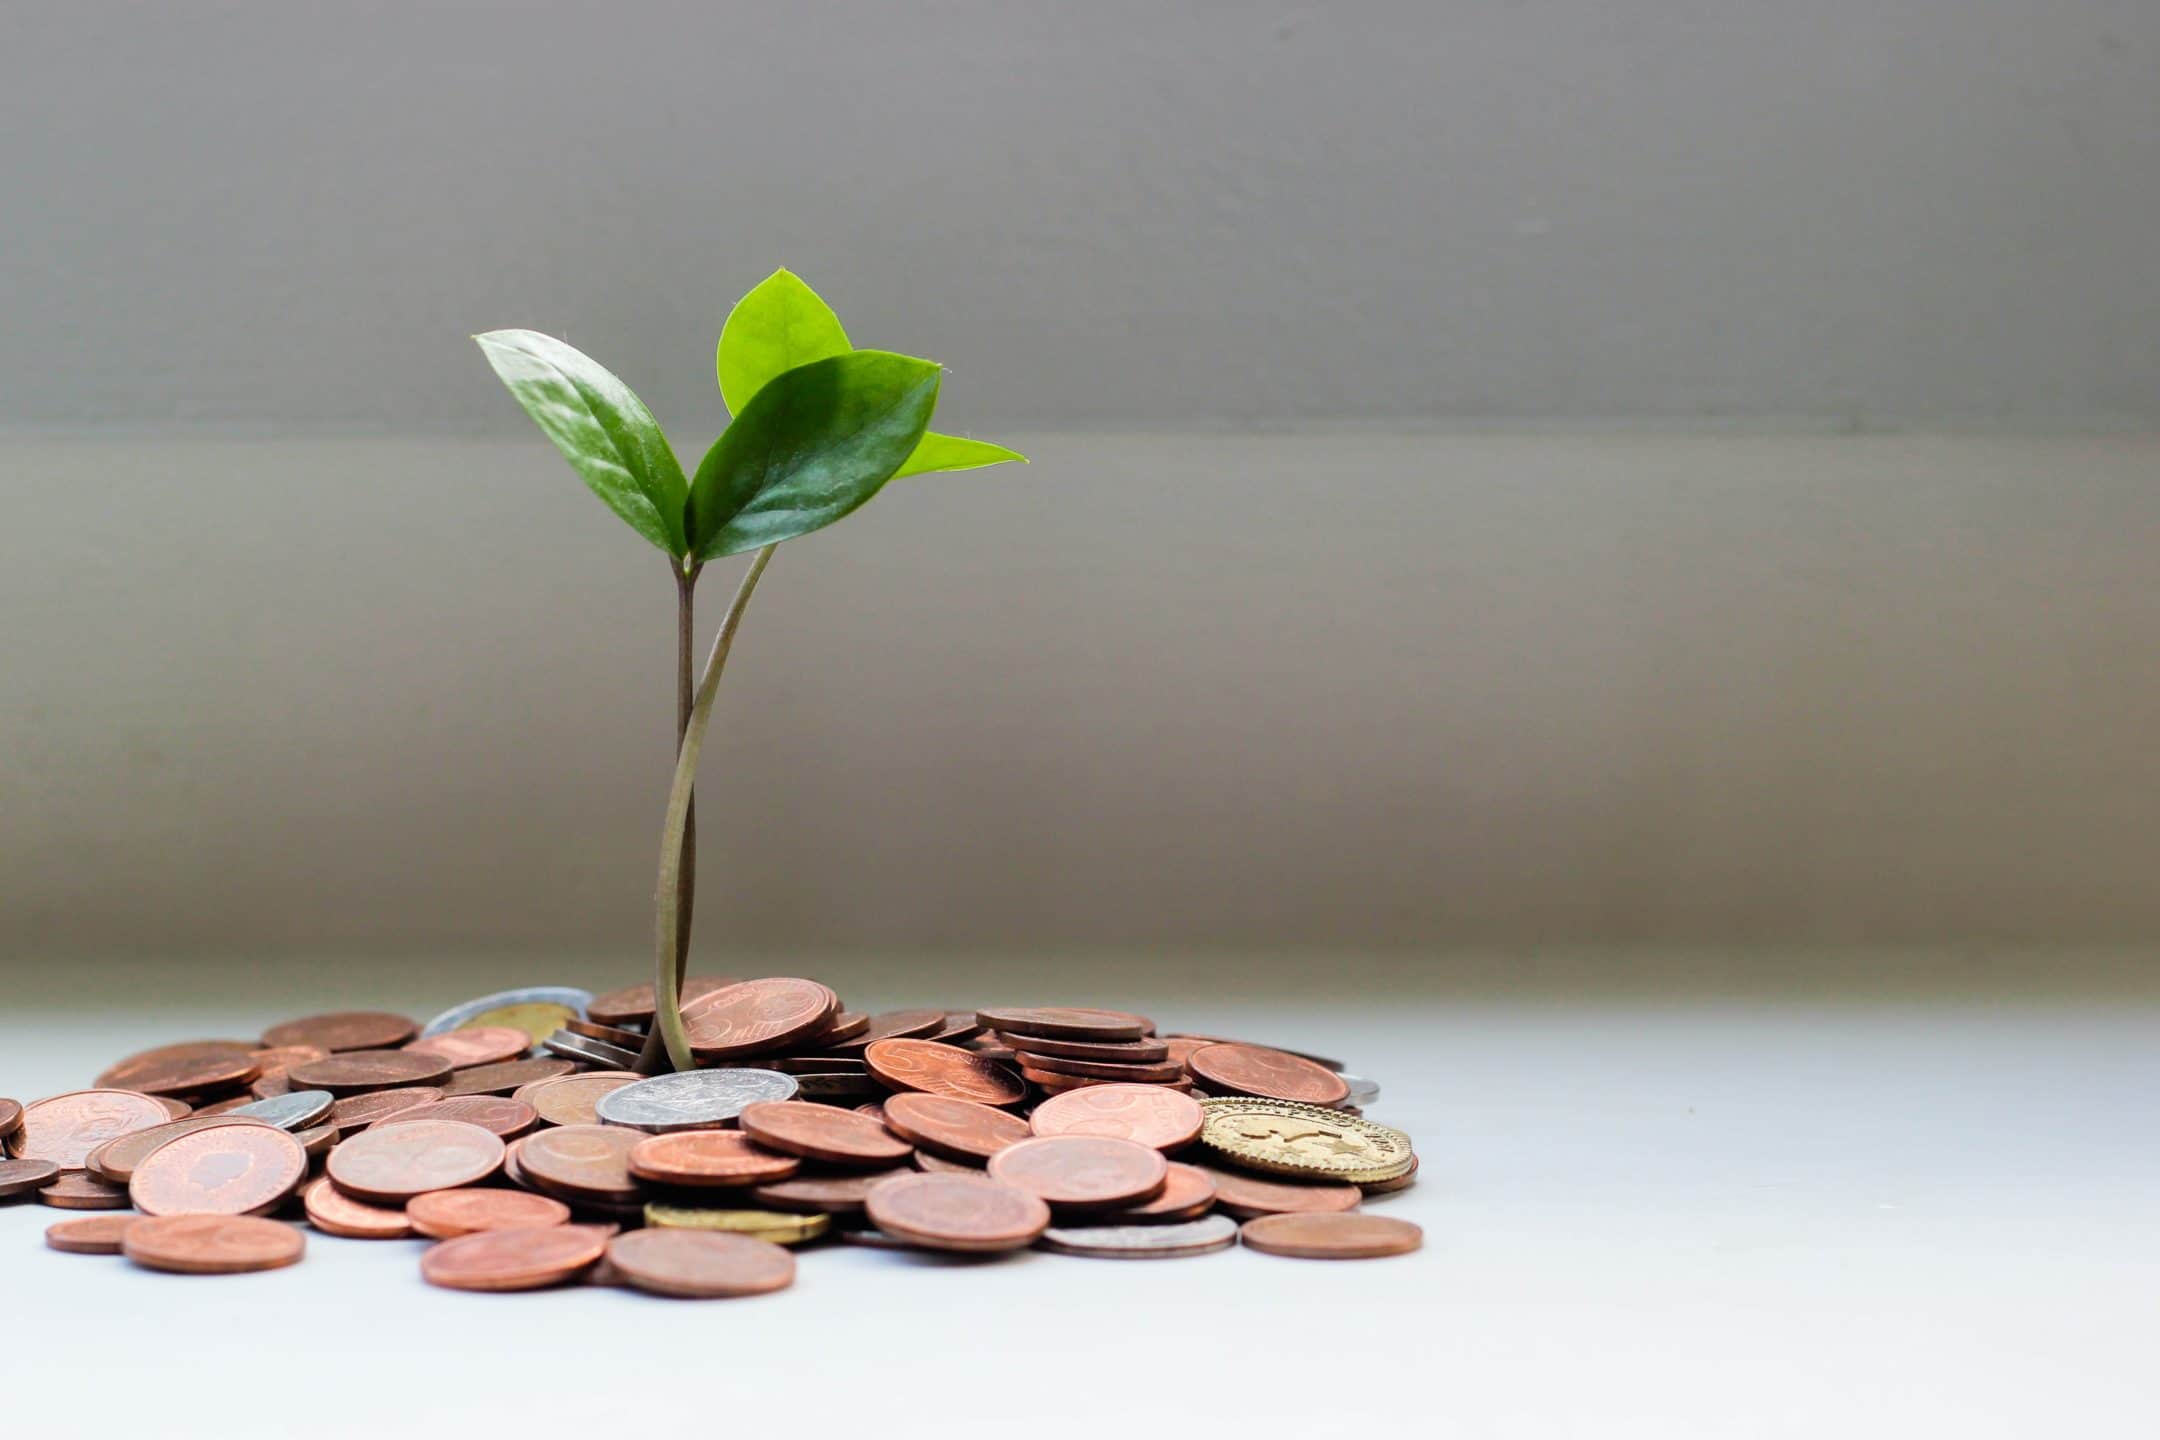 Picture of a plant growing out of a pile of coins, representing growth through financial planning